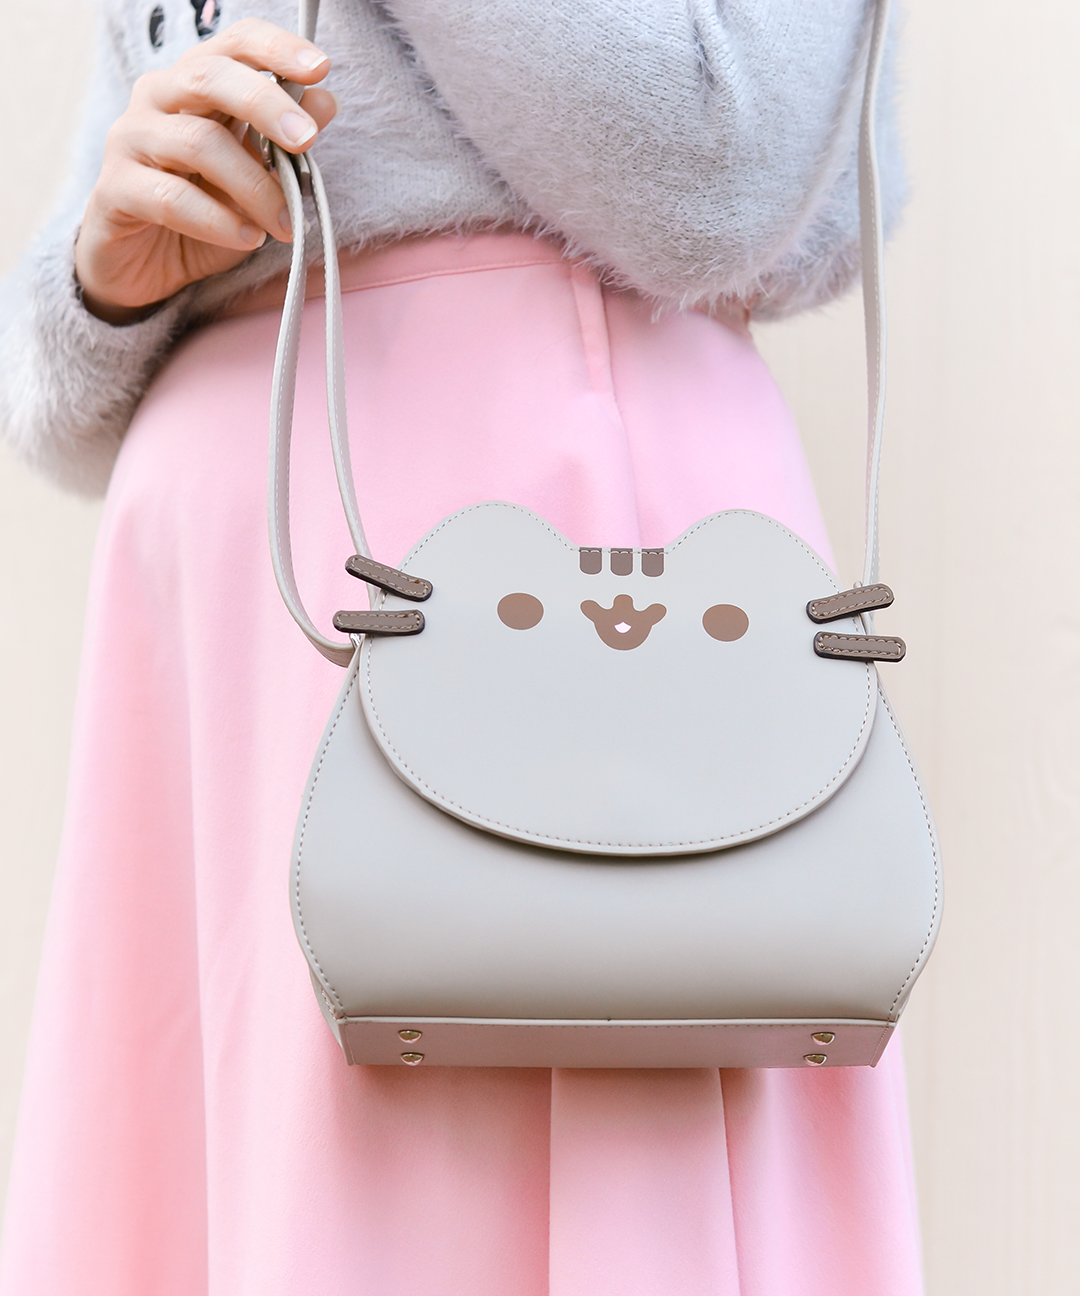 How to Wear Cute Purse: 13 Lovely & Amazing Outfit Ideas for Women